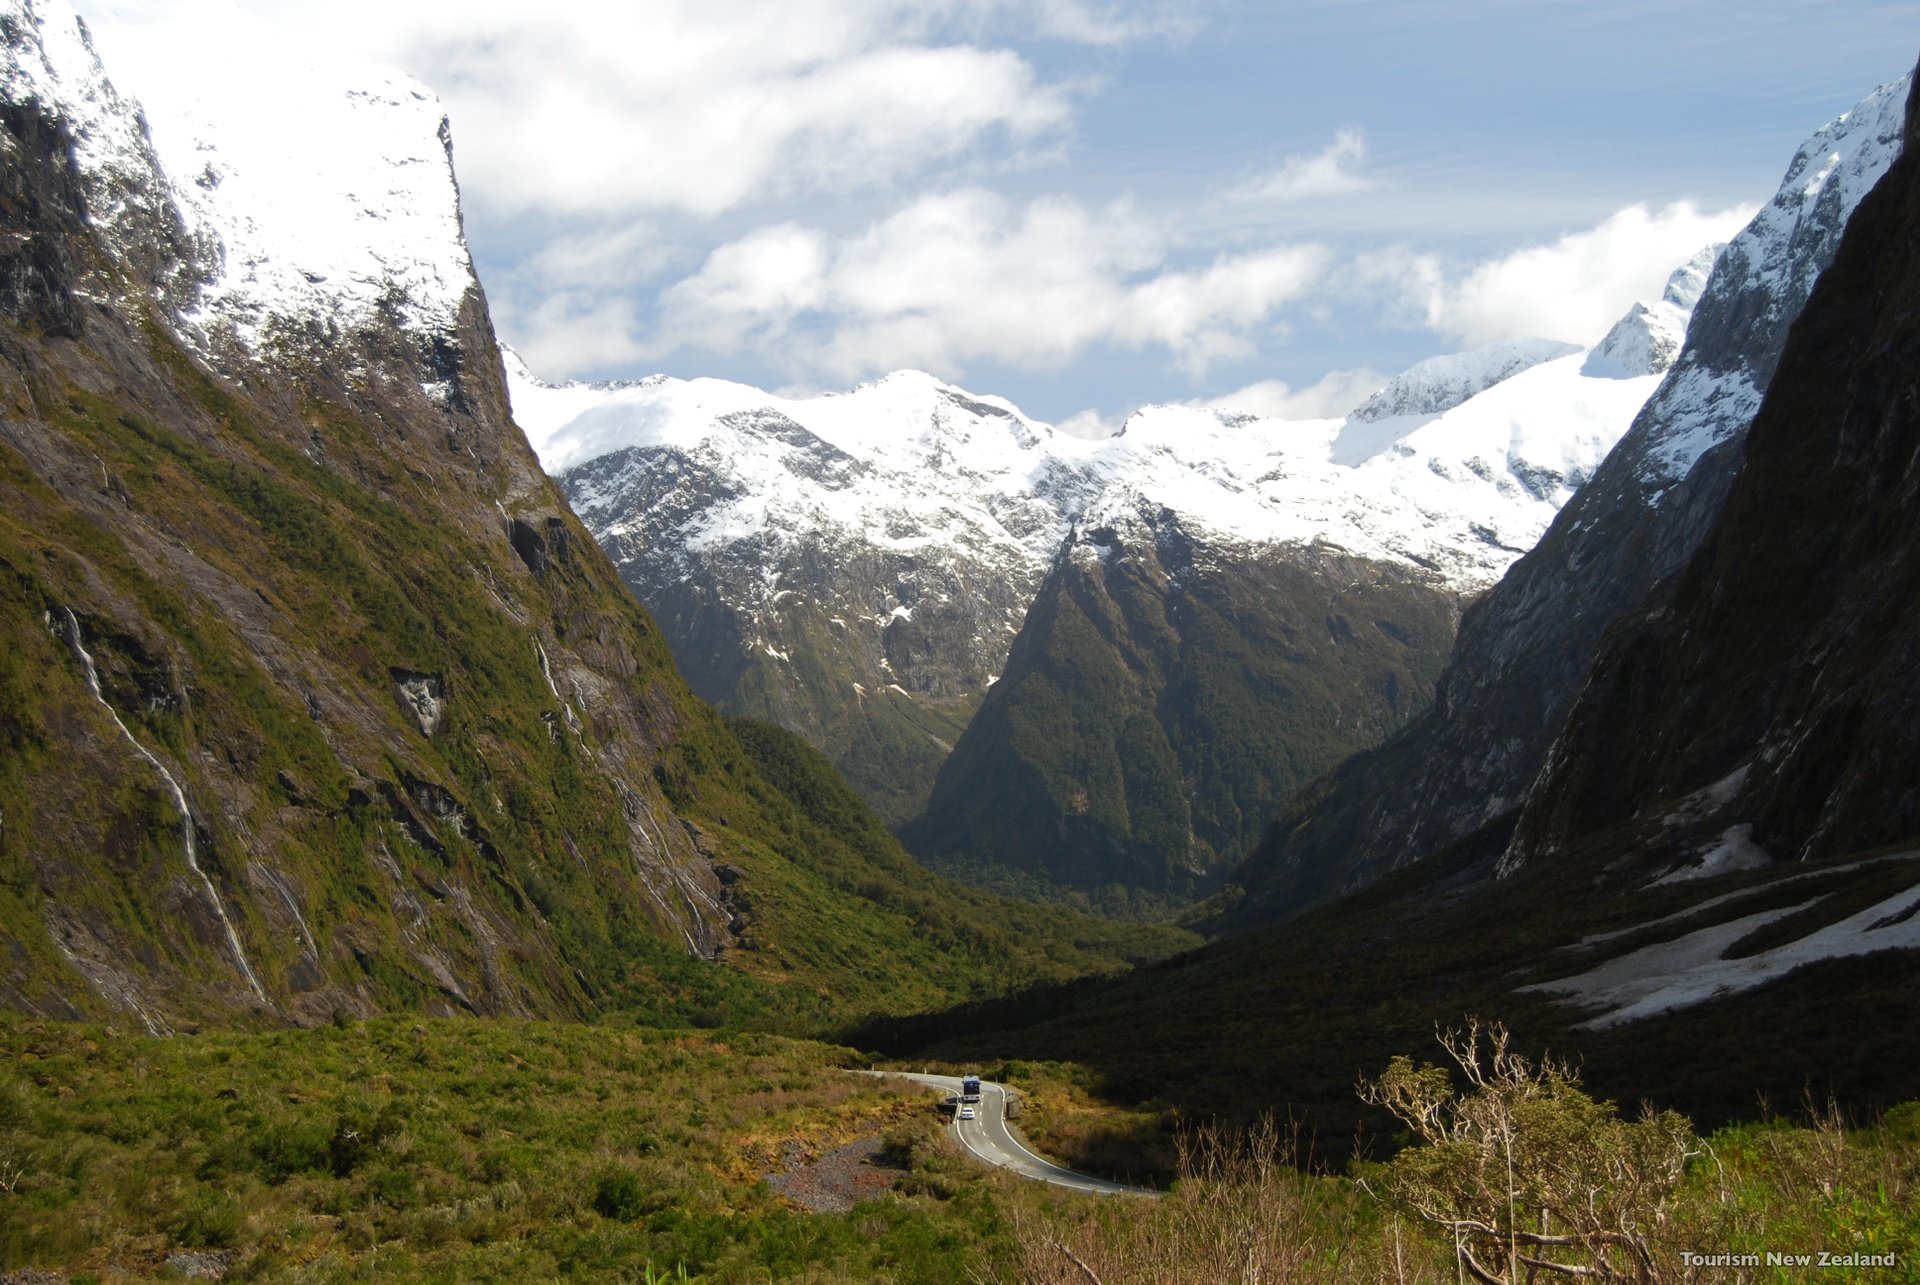 The Milford Road through the Cleddau Valley. Picture courtesy Tourism New Zealand.